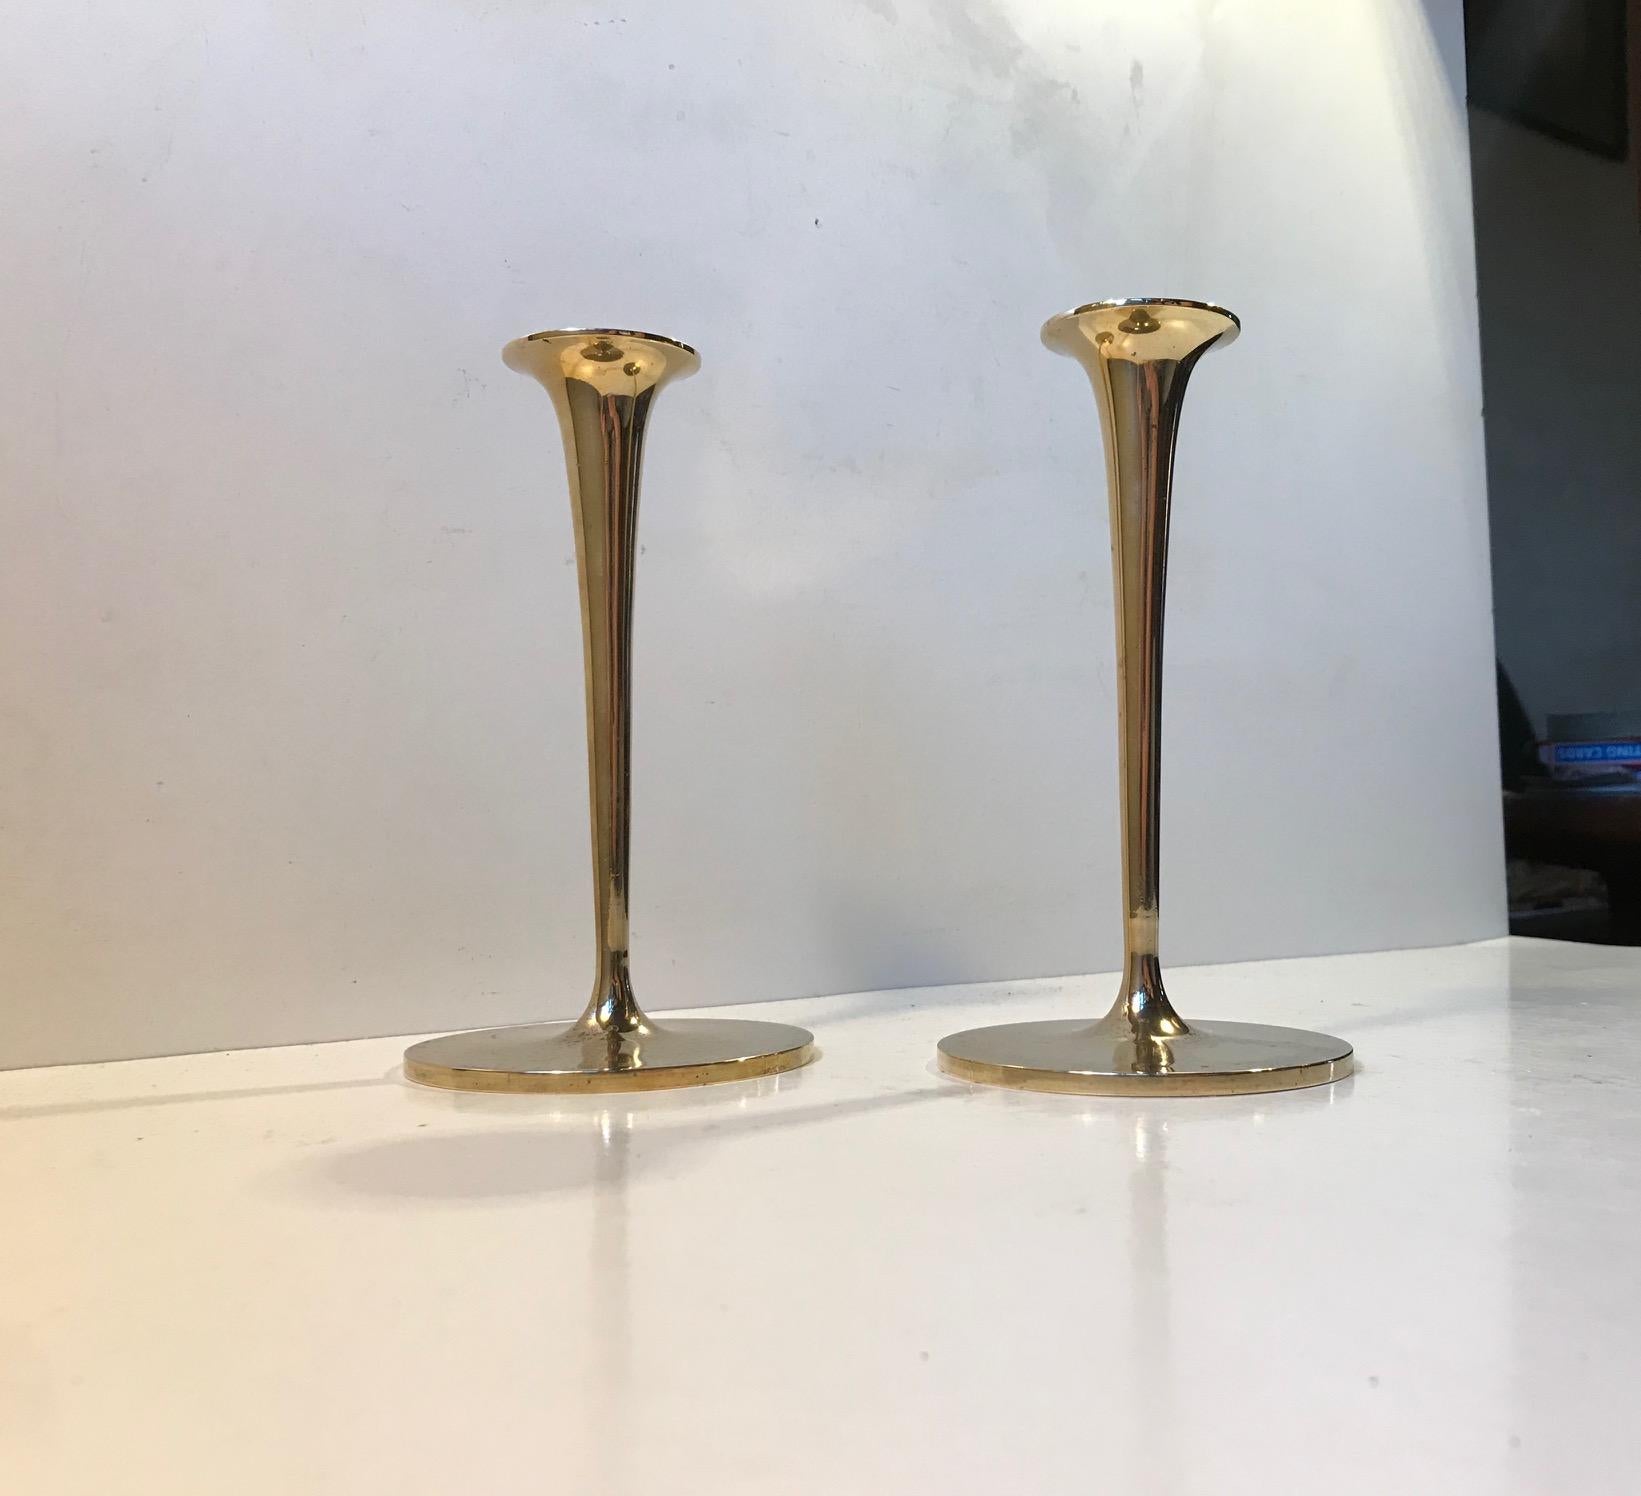 A pair of solid brass candlesticks manufactured in Scandinavia during the 1960s. The candlesticks are to be fitted with regular sixed candles. They have not been polished recently and display patina. The style of this set is reminiscent of